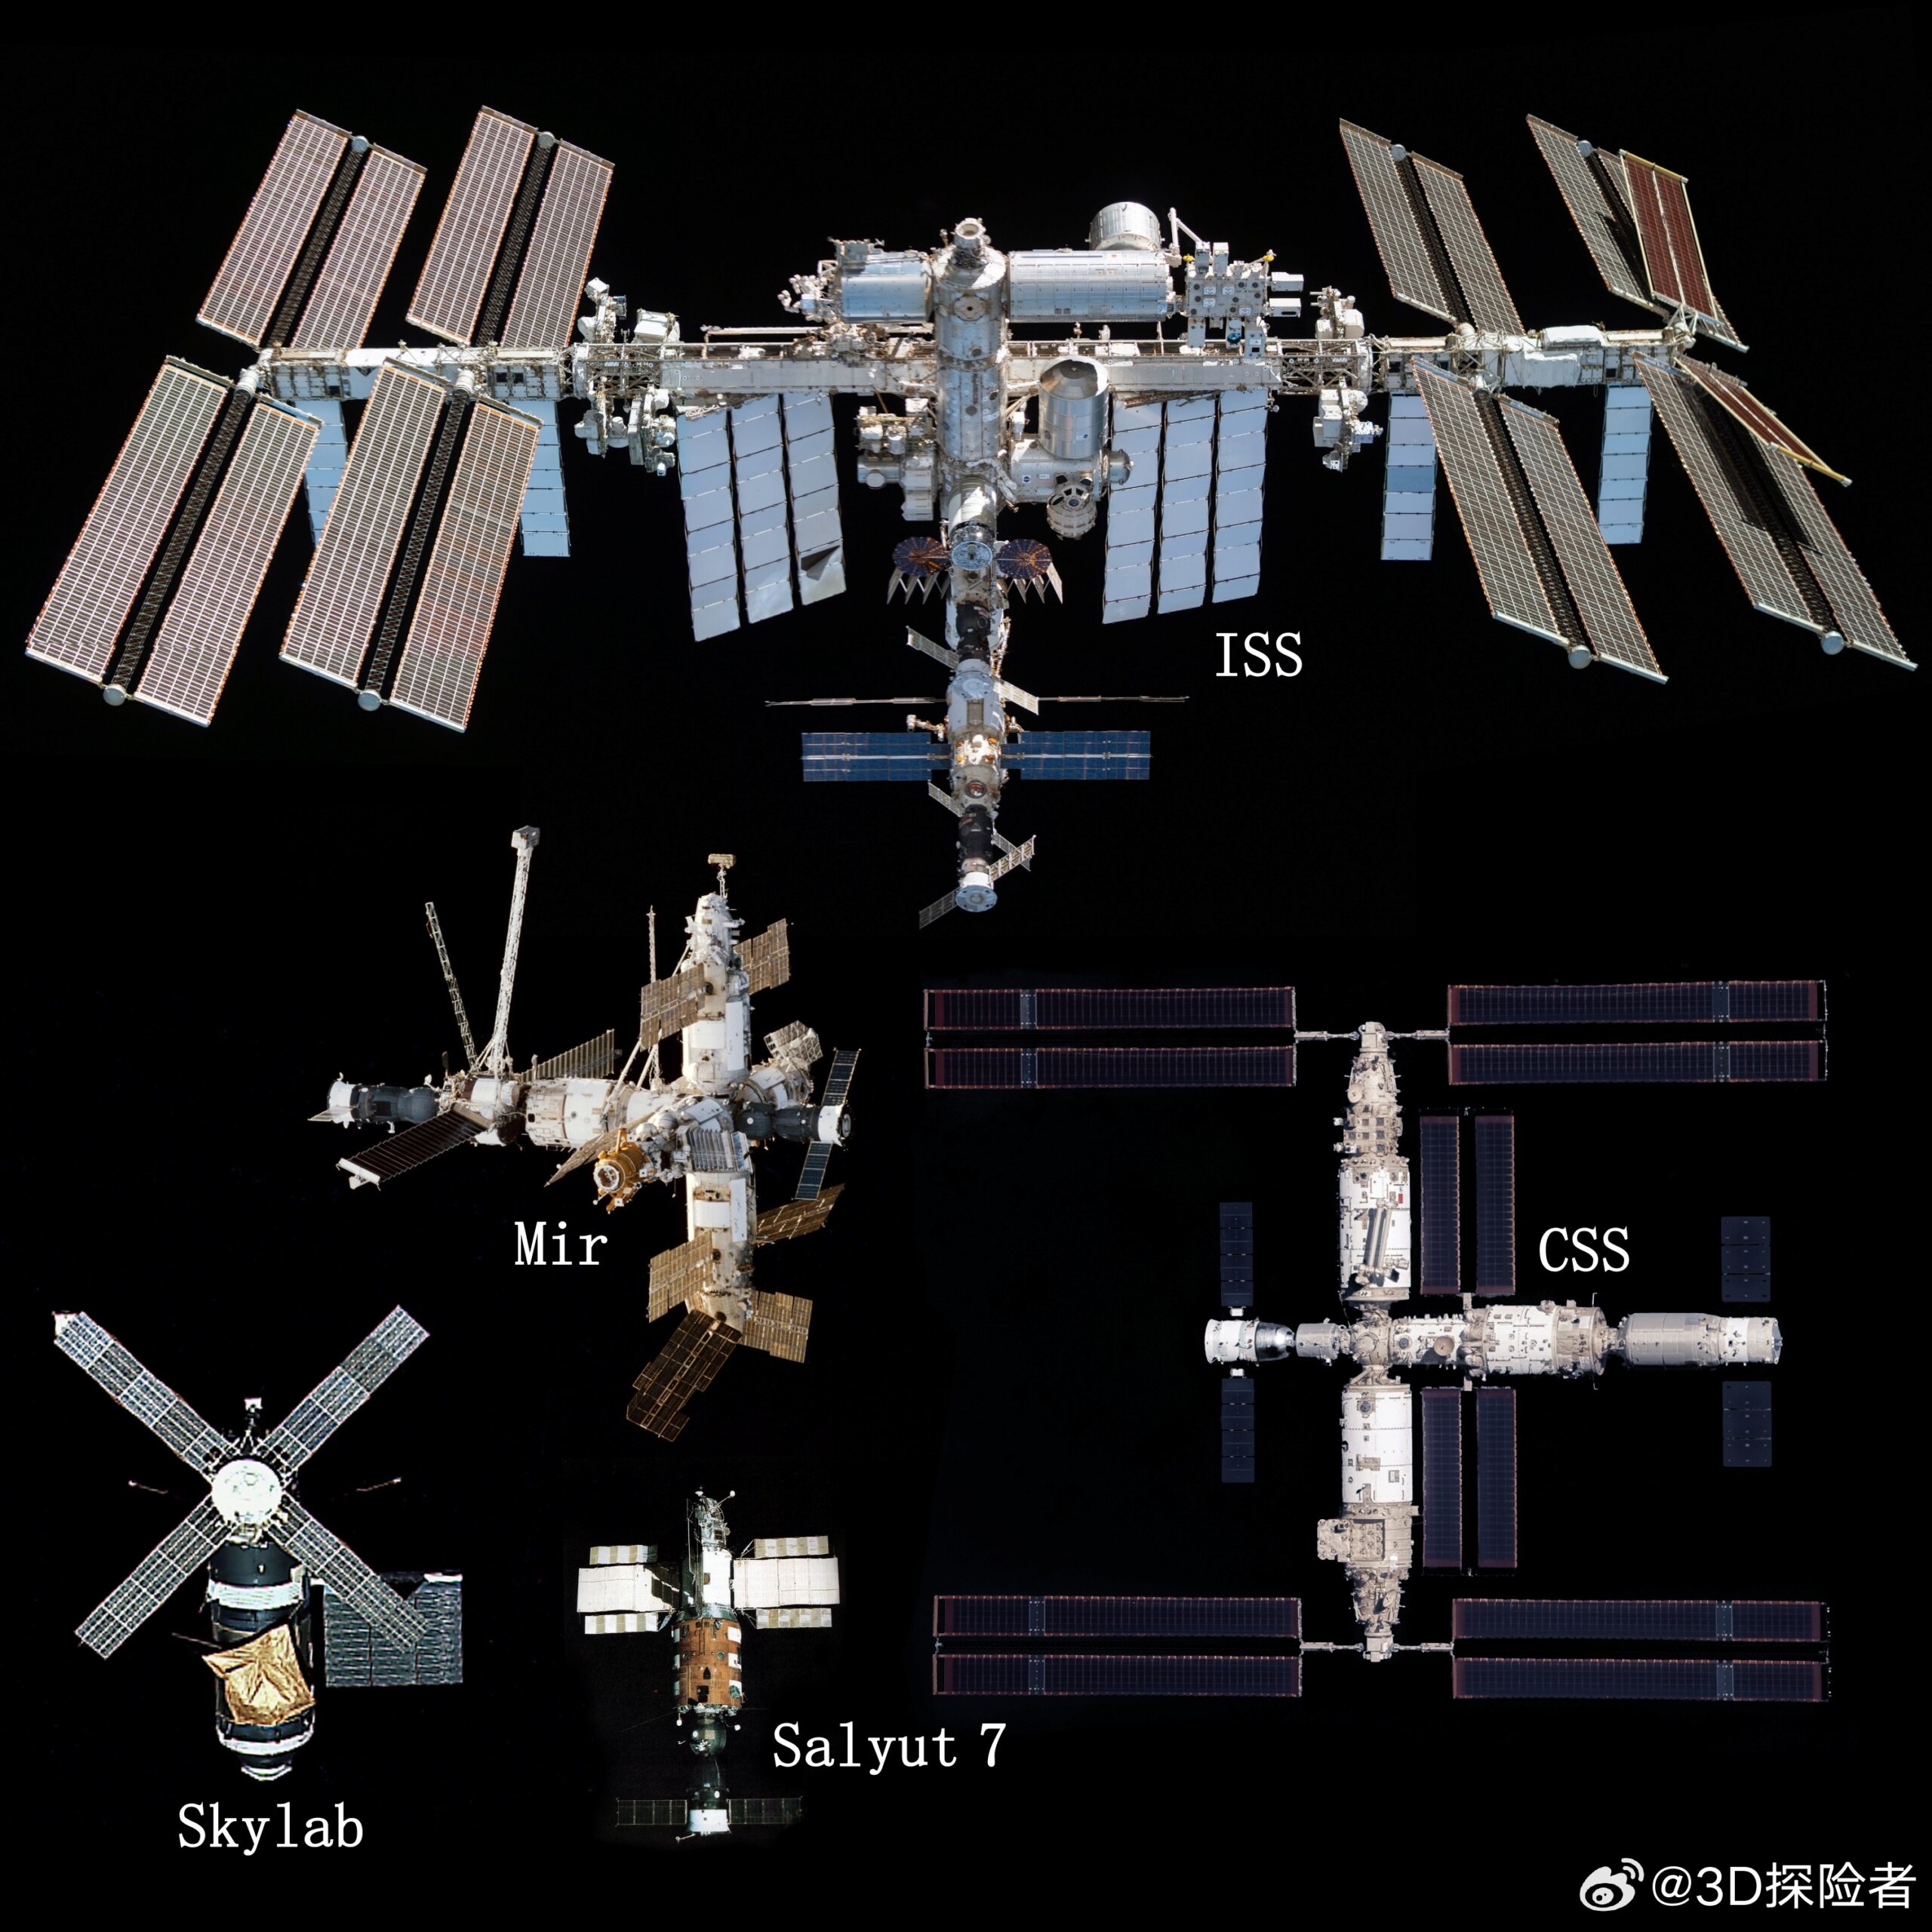 Station spatiale chinoise (Tiangong/CSS) - Page 23 23112810